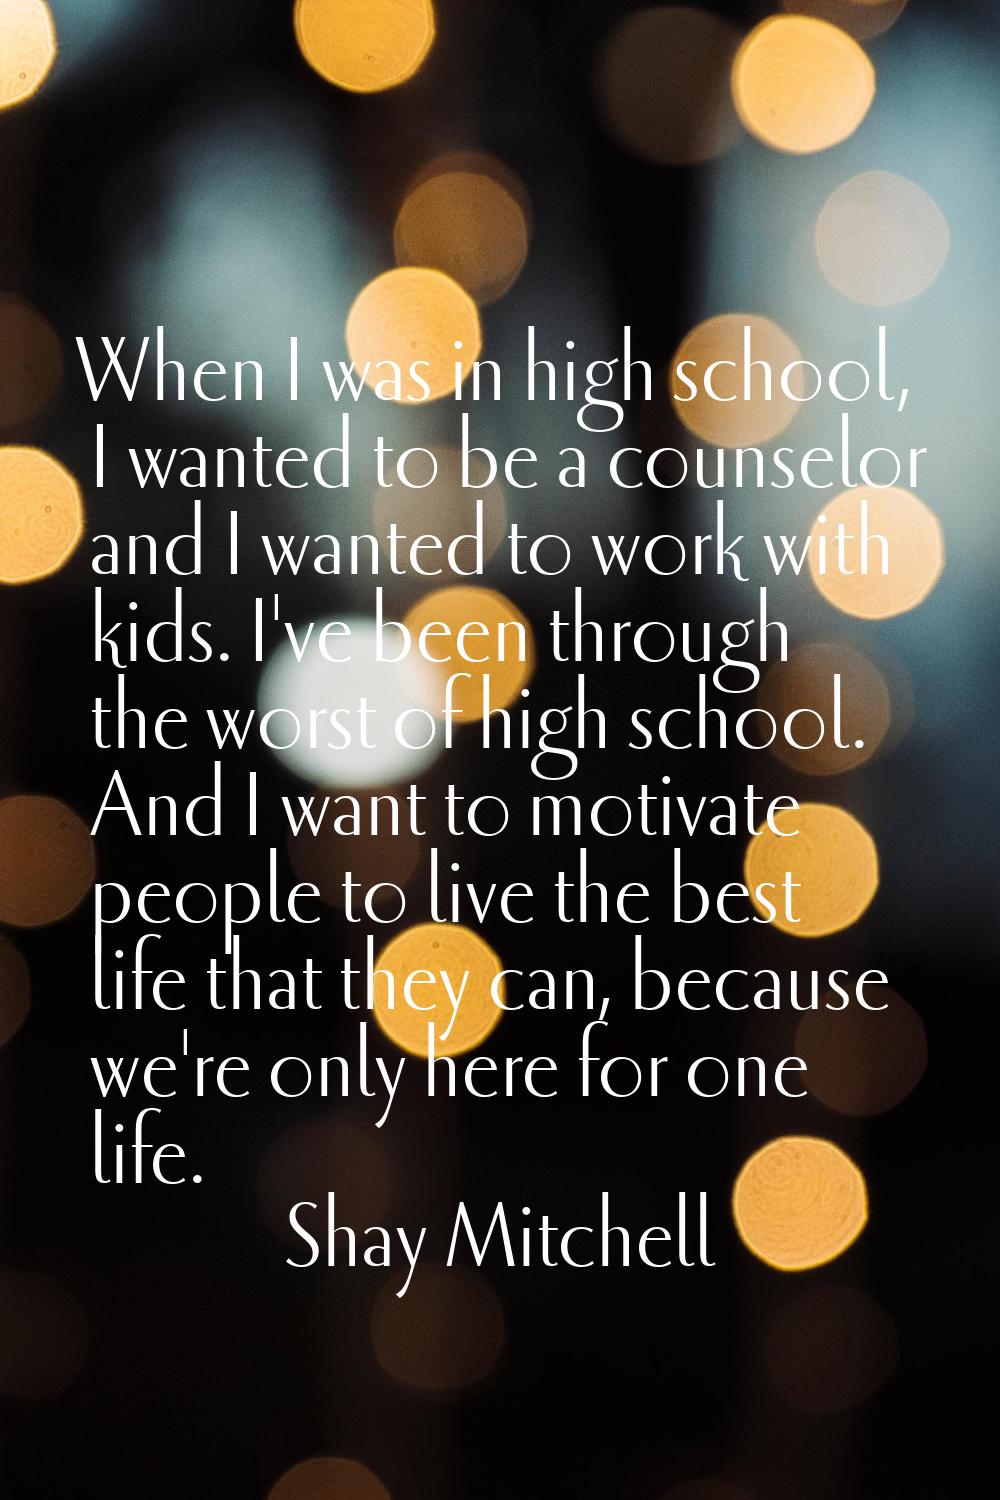 When I was in high school, I wanted to be a counselor and I wanted to work with kids. I've been thr